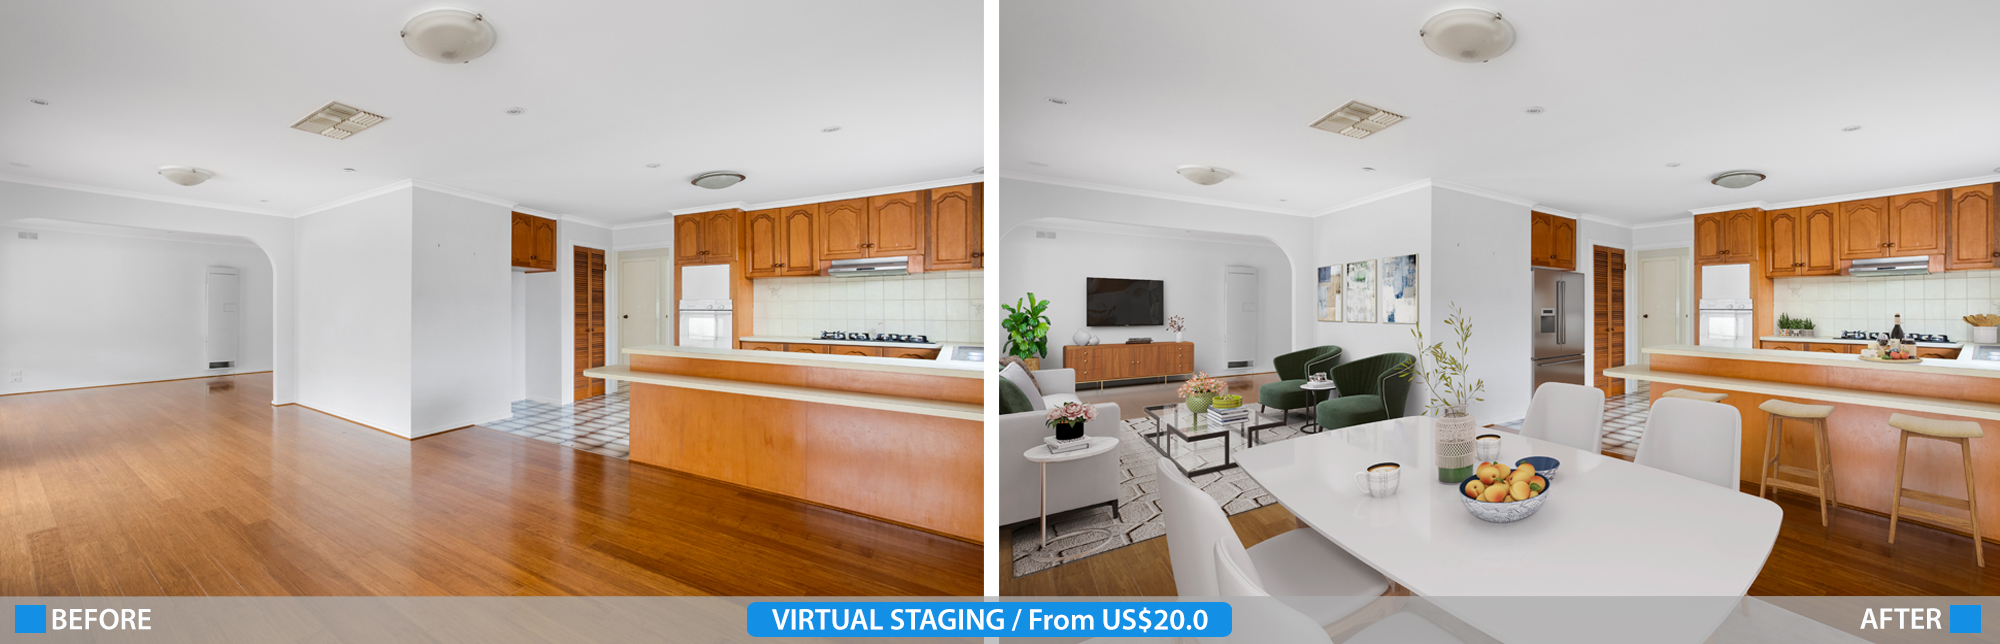 Banner Virtual Staging